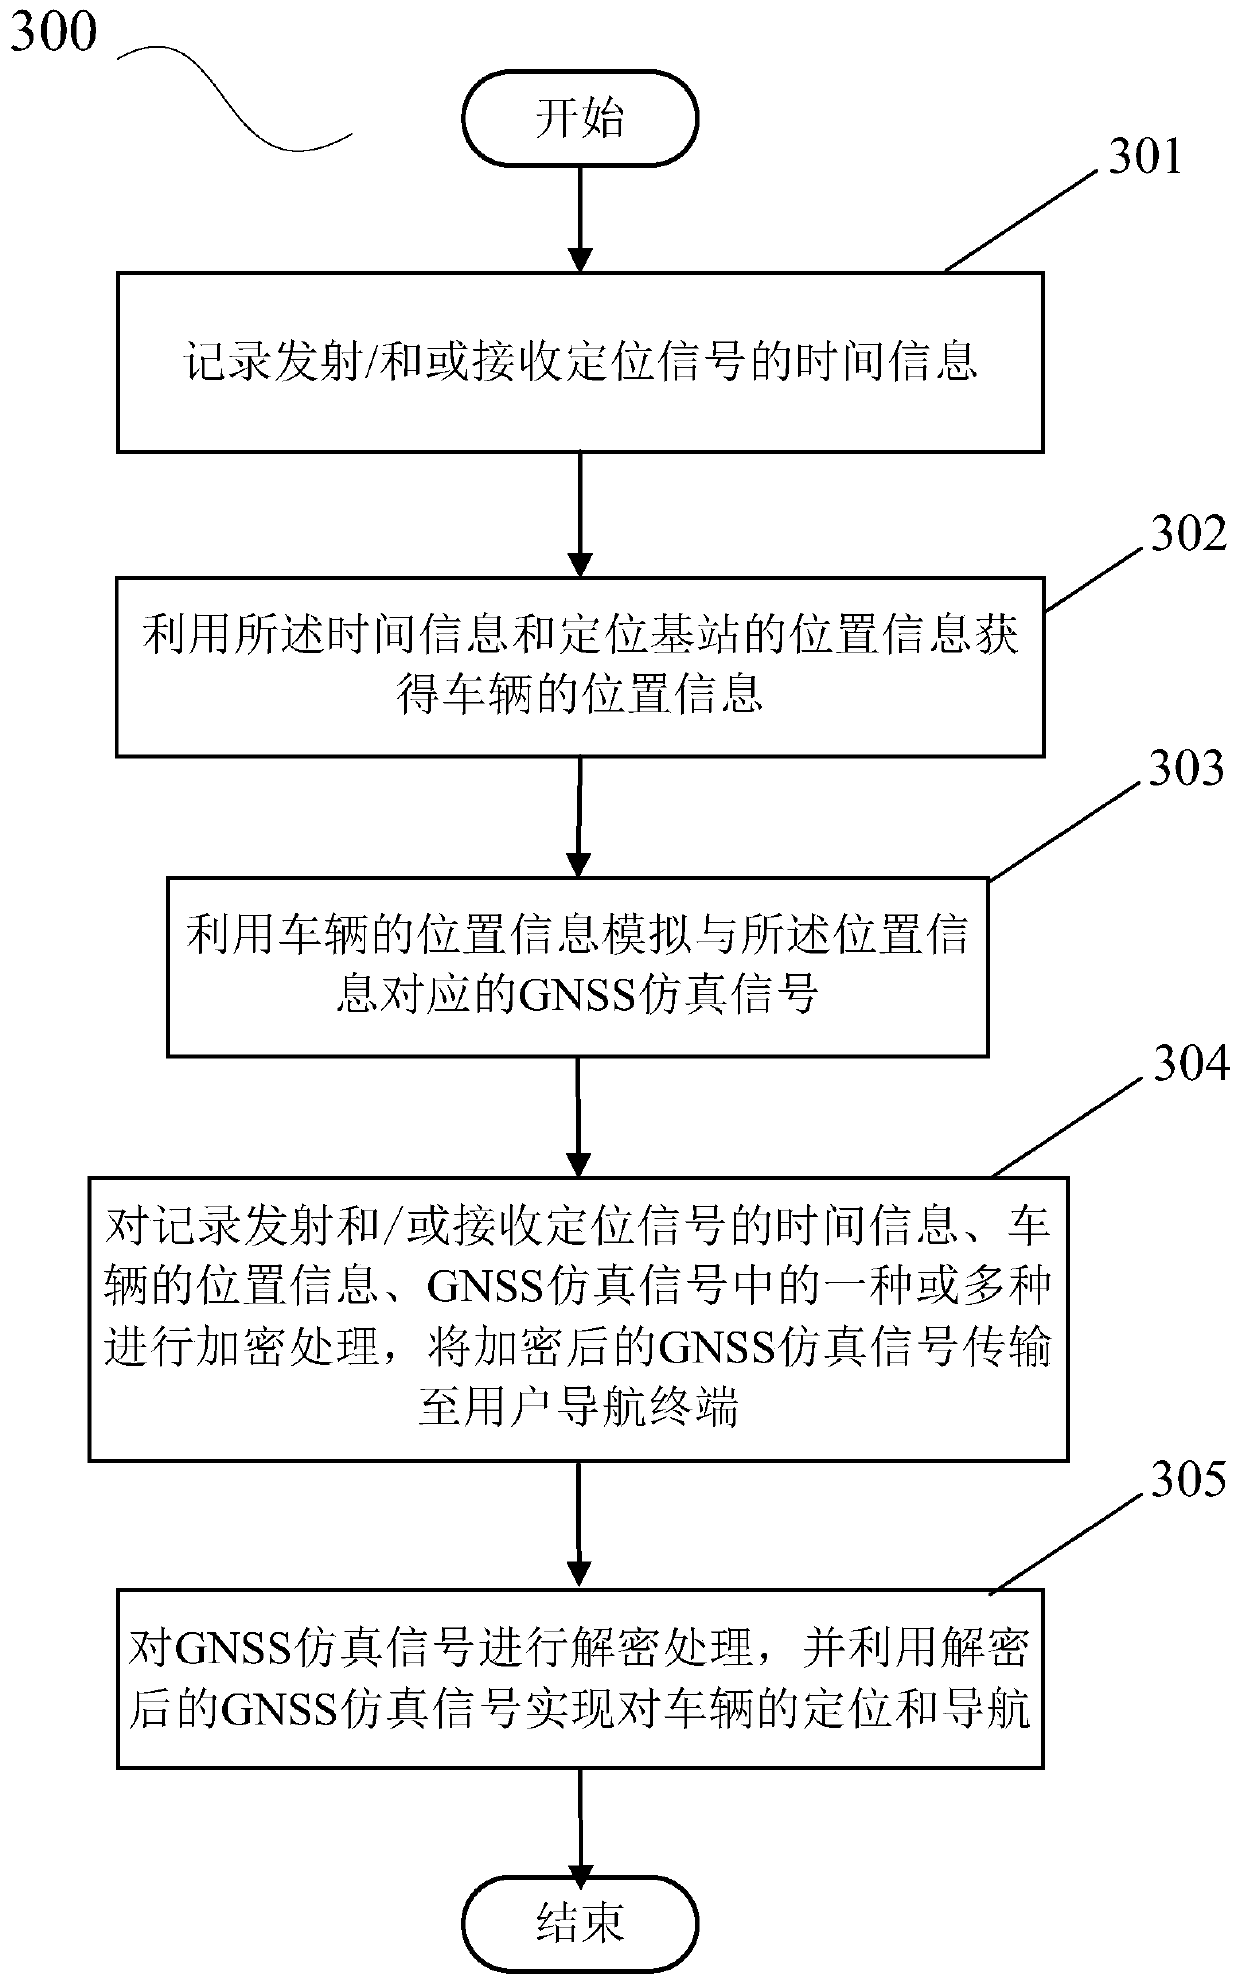 Exclusive vehicle-mounted GNSS (Global Navigation Satellite System) signal compensation device and positioning system and method